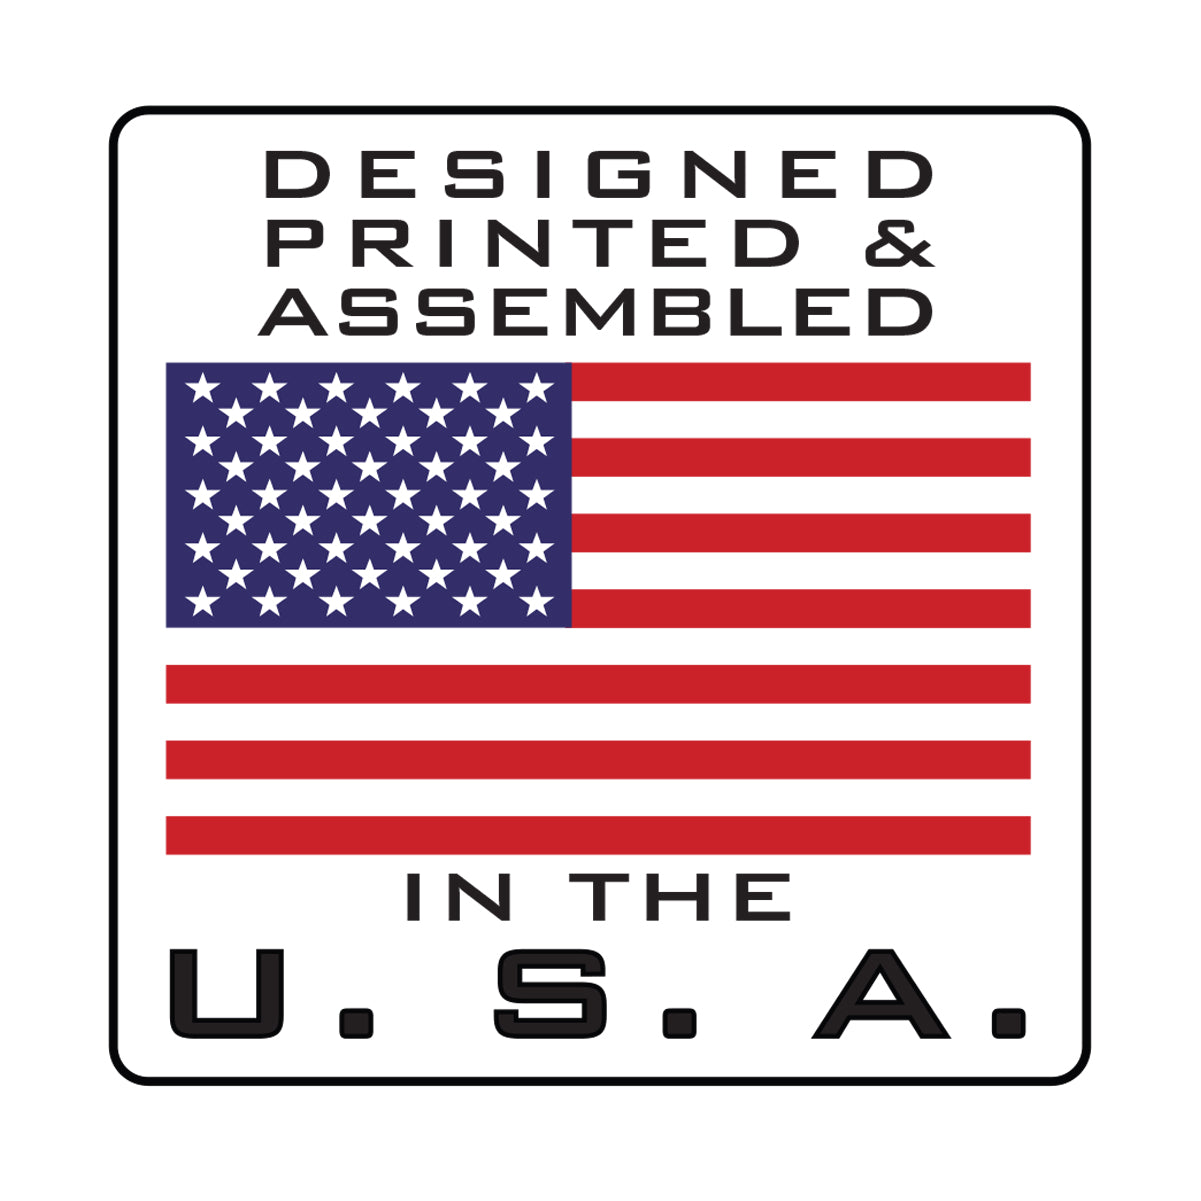 Designed Printed and Assembled in the USA